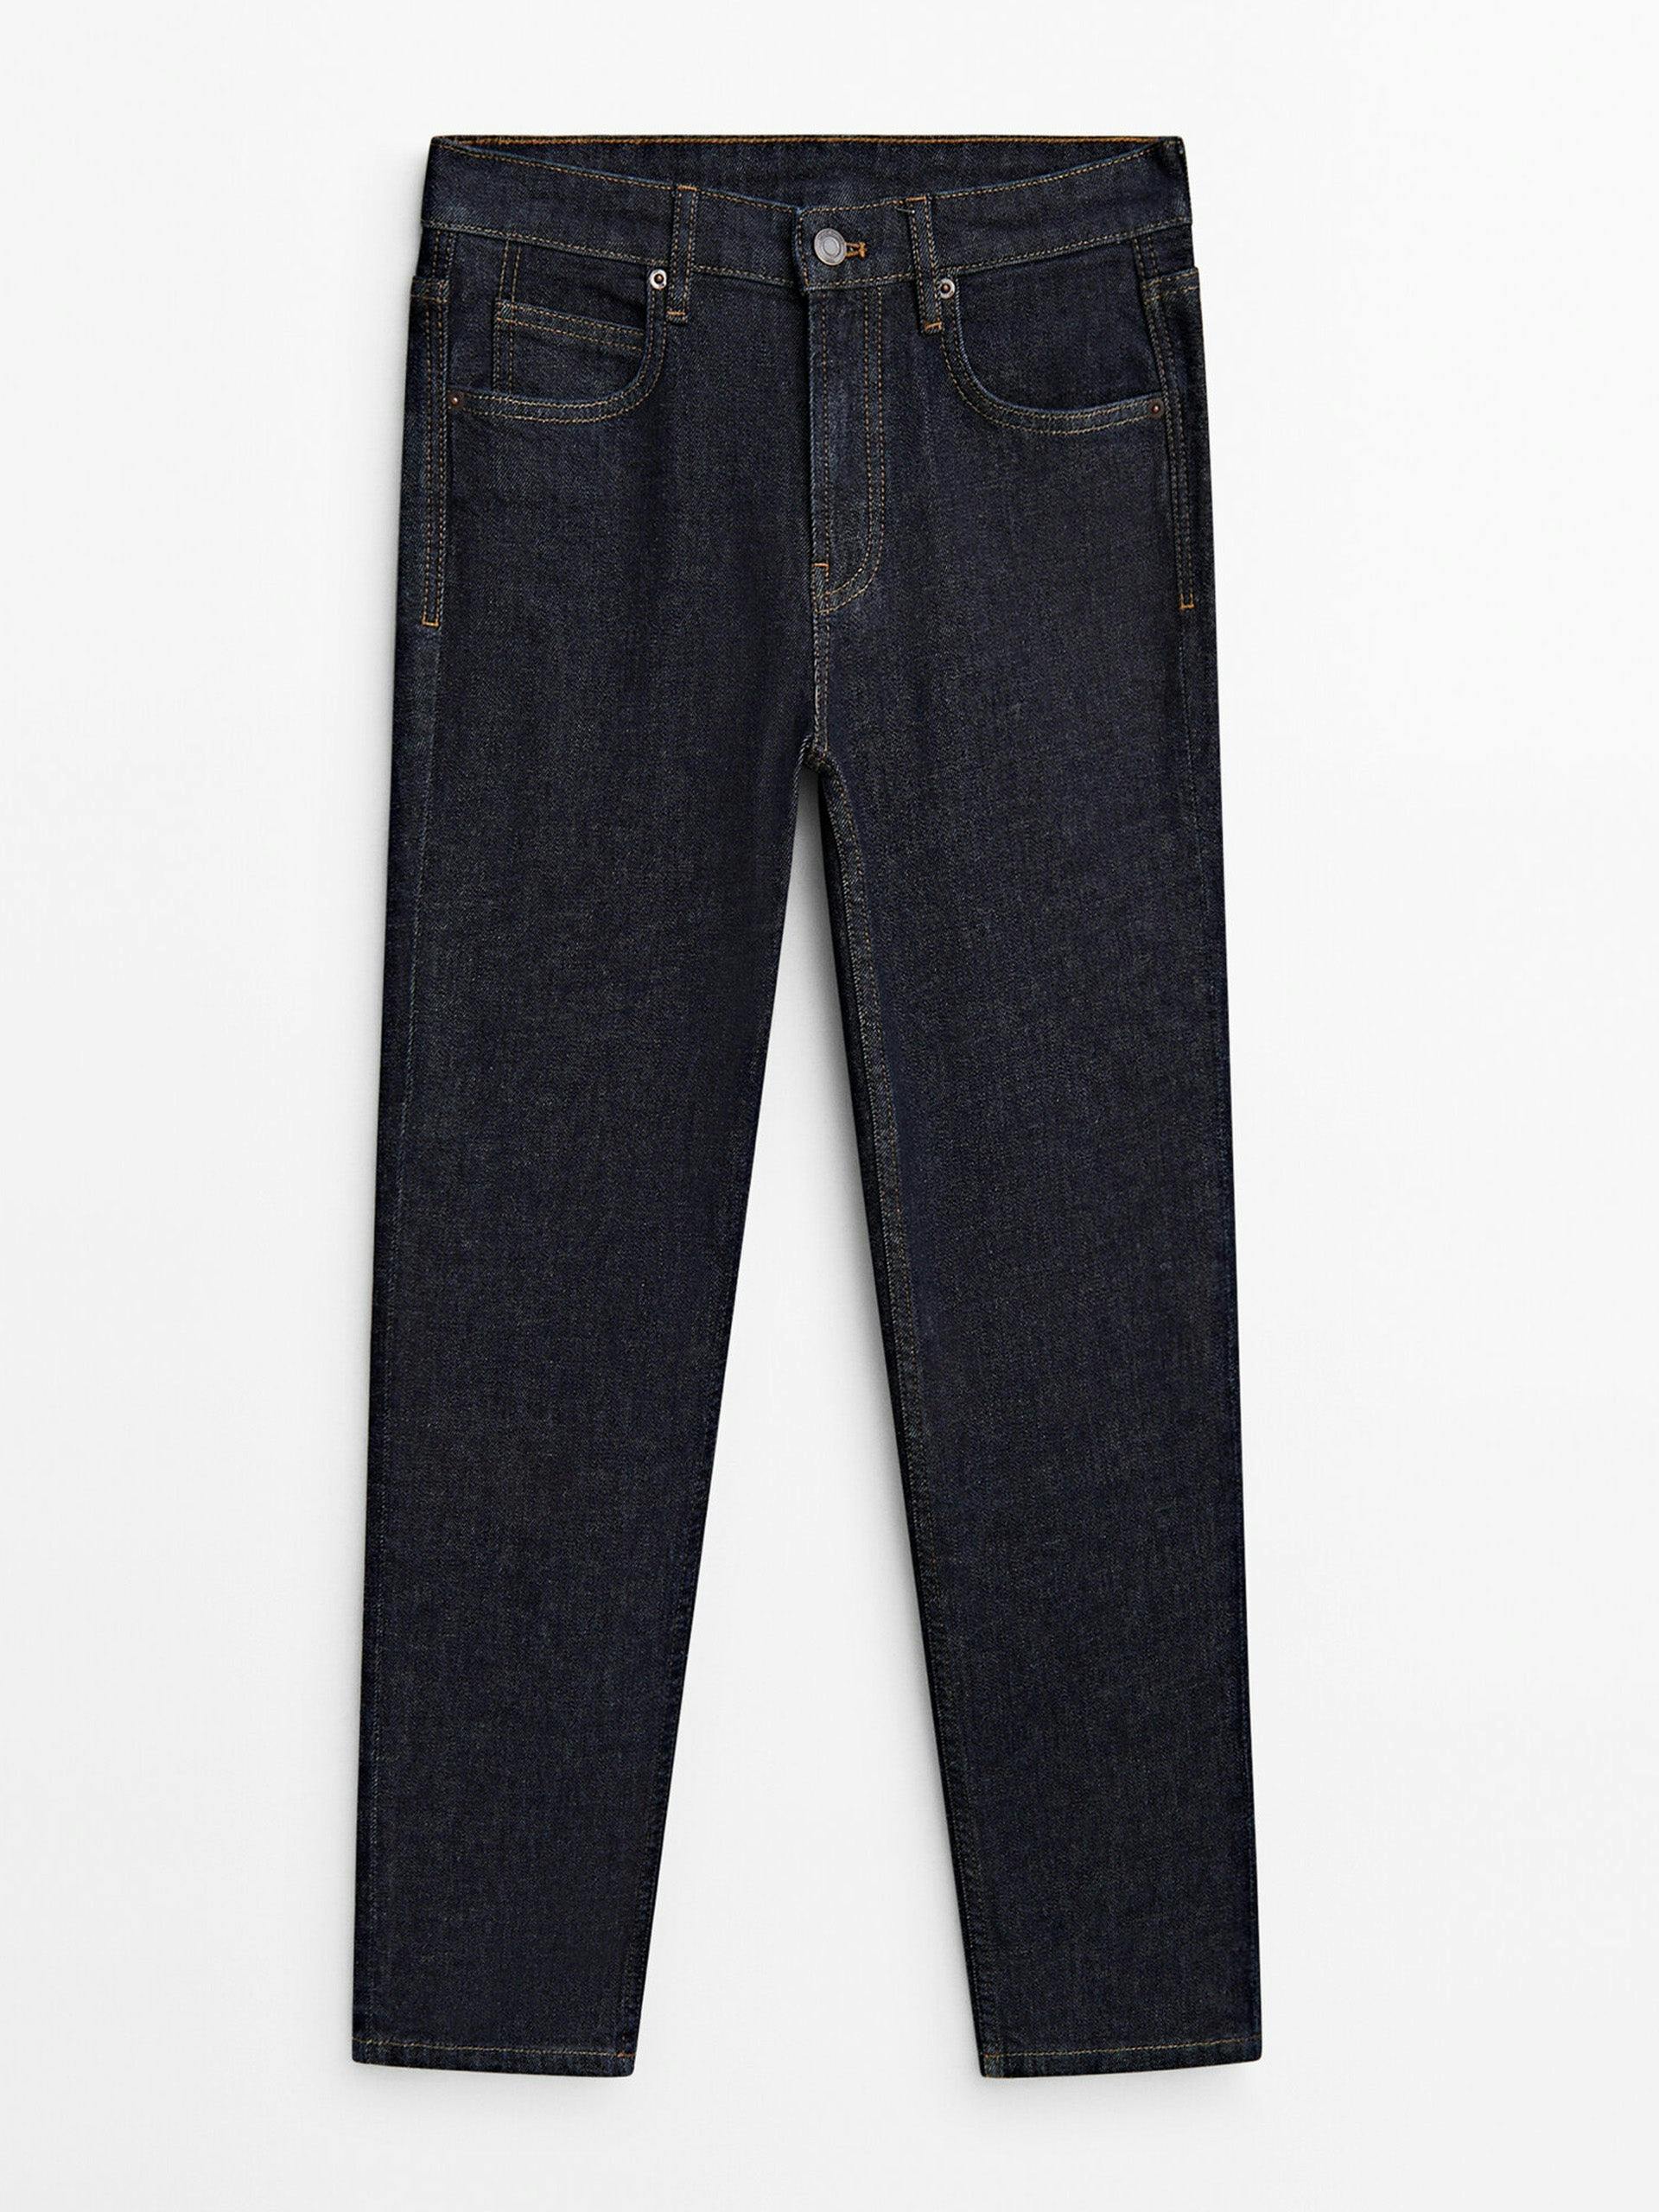 Dark blue cropped slim fit mid rise jeans